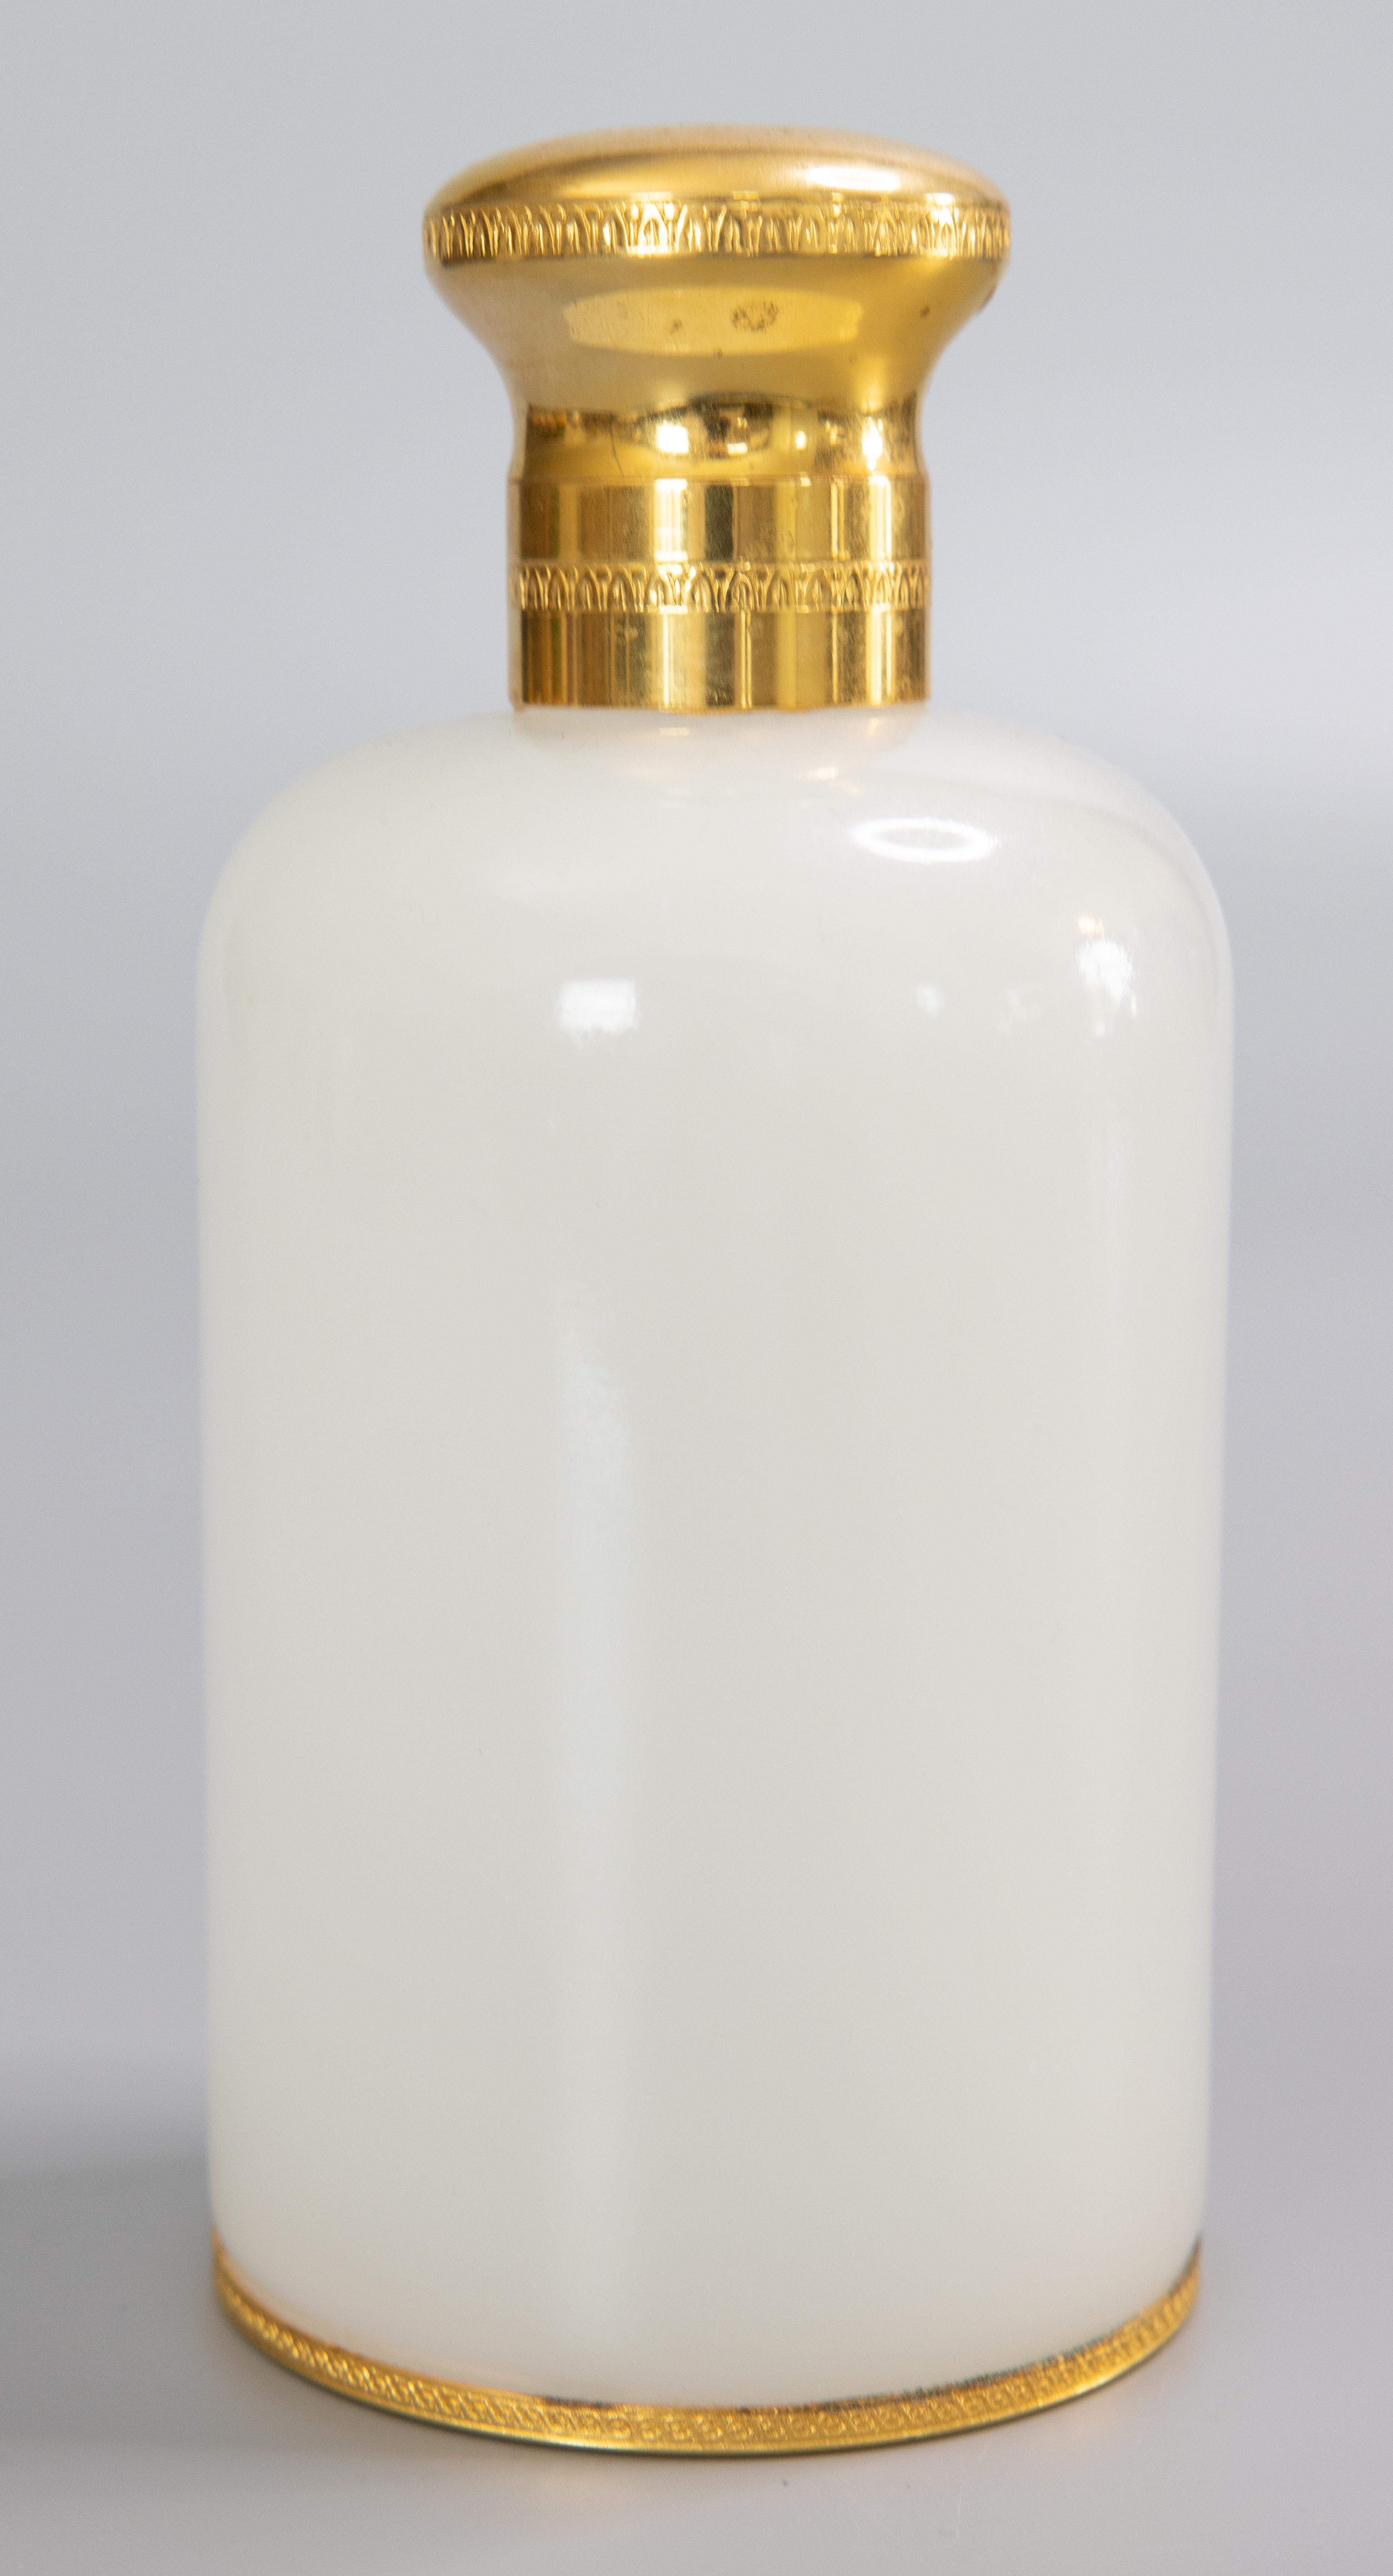 A lovely antique early 20th century French white opaline glass cologne or perfume scent bottle with ormolu mounts. This stunning scent bottle is a nice large Size and heavy, weighing 1 lb 4 oz, with a sleek stylish design, perfect for the modern